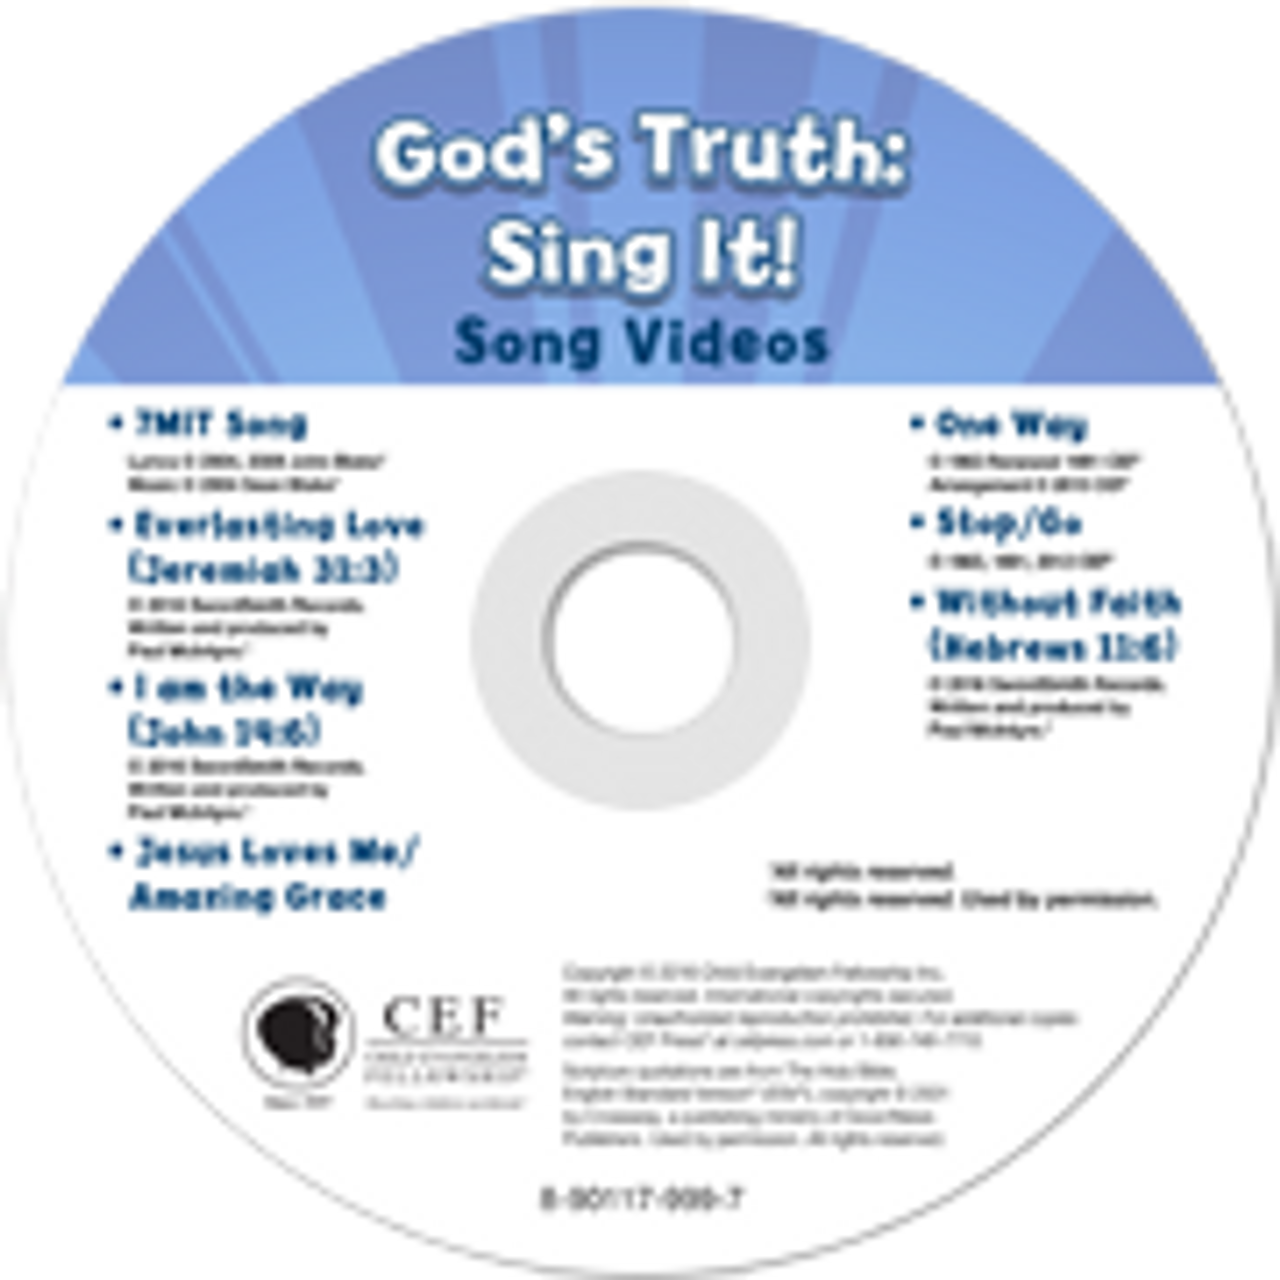 Gods Truth: Sing It! Vol 1 (song video)